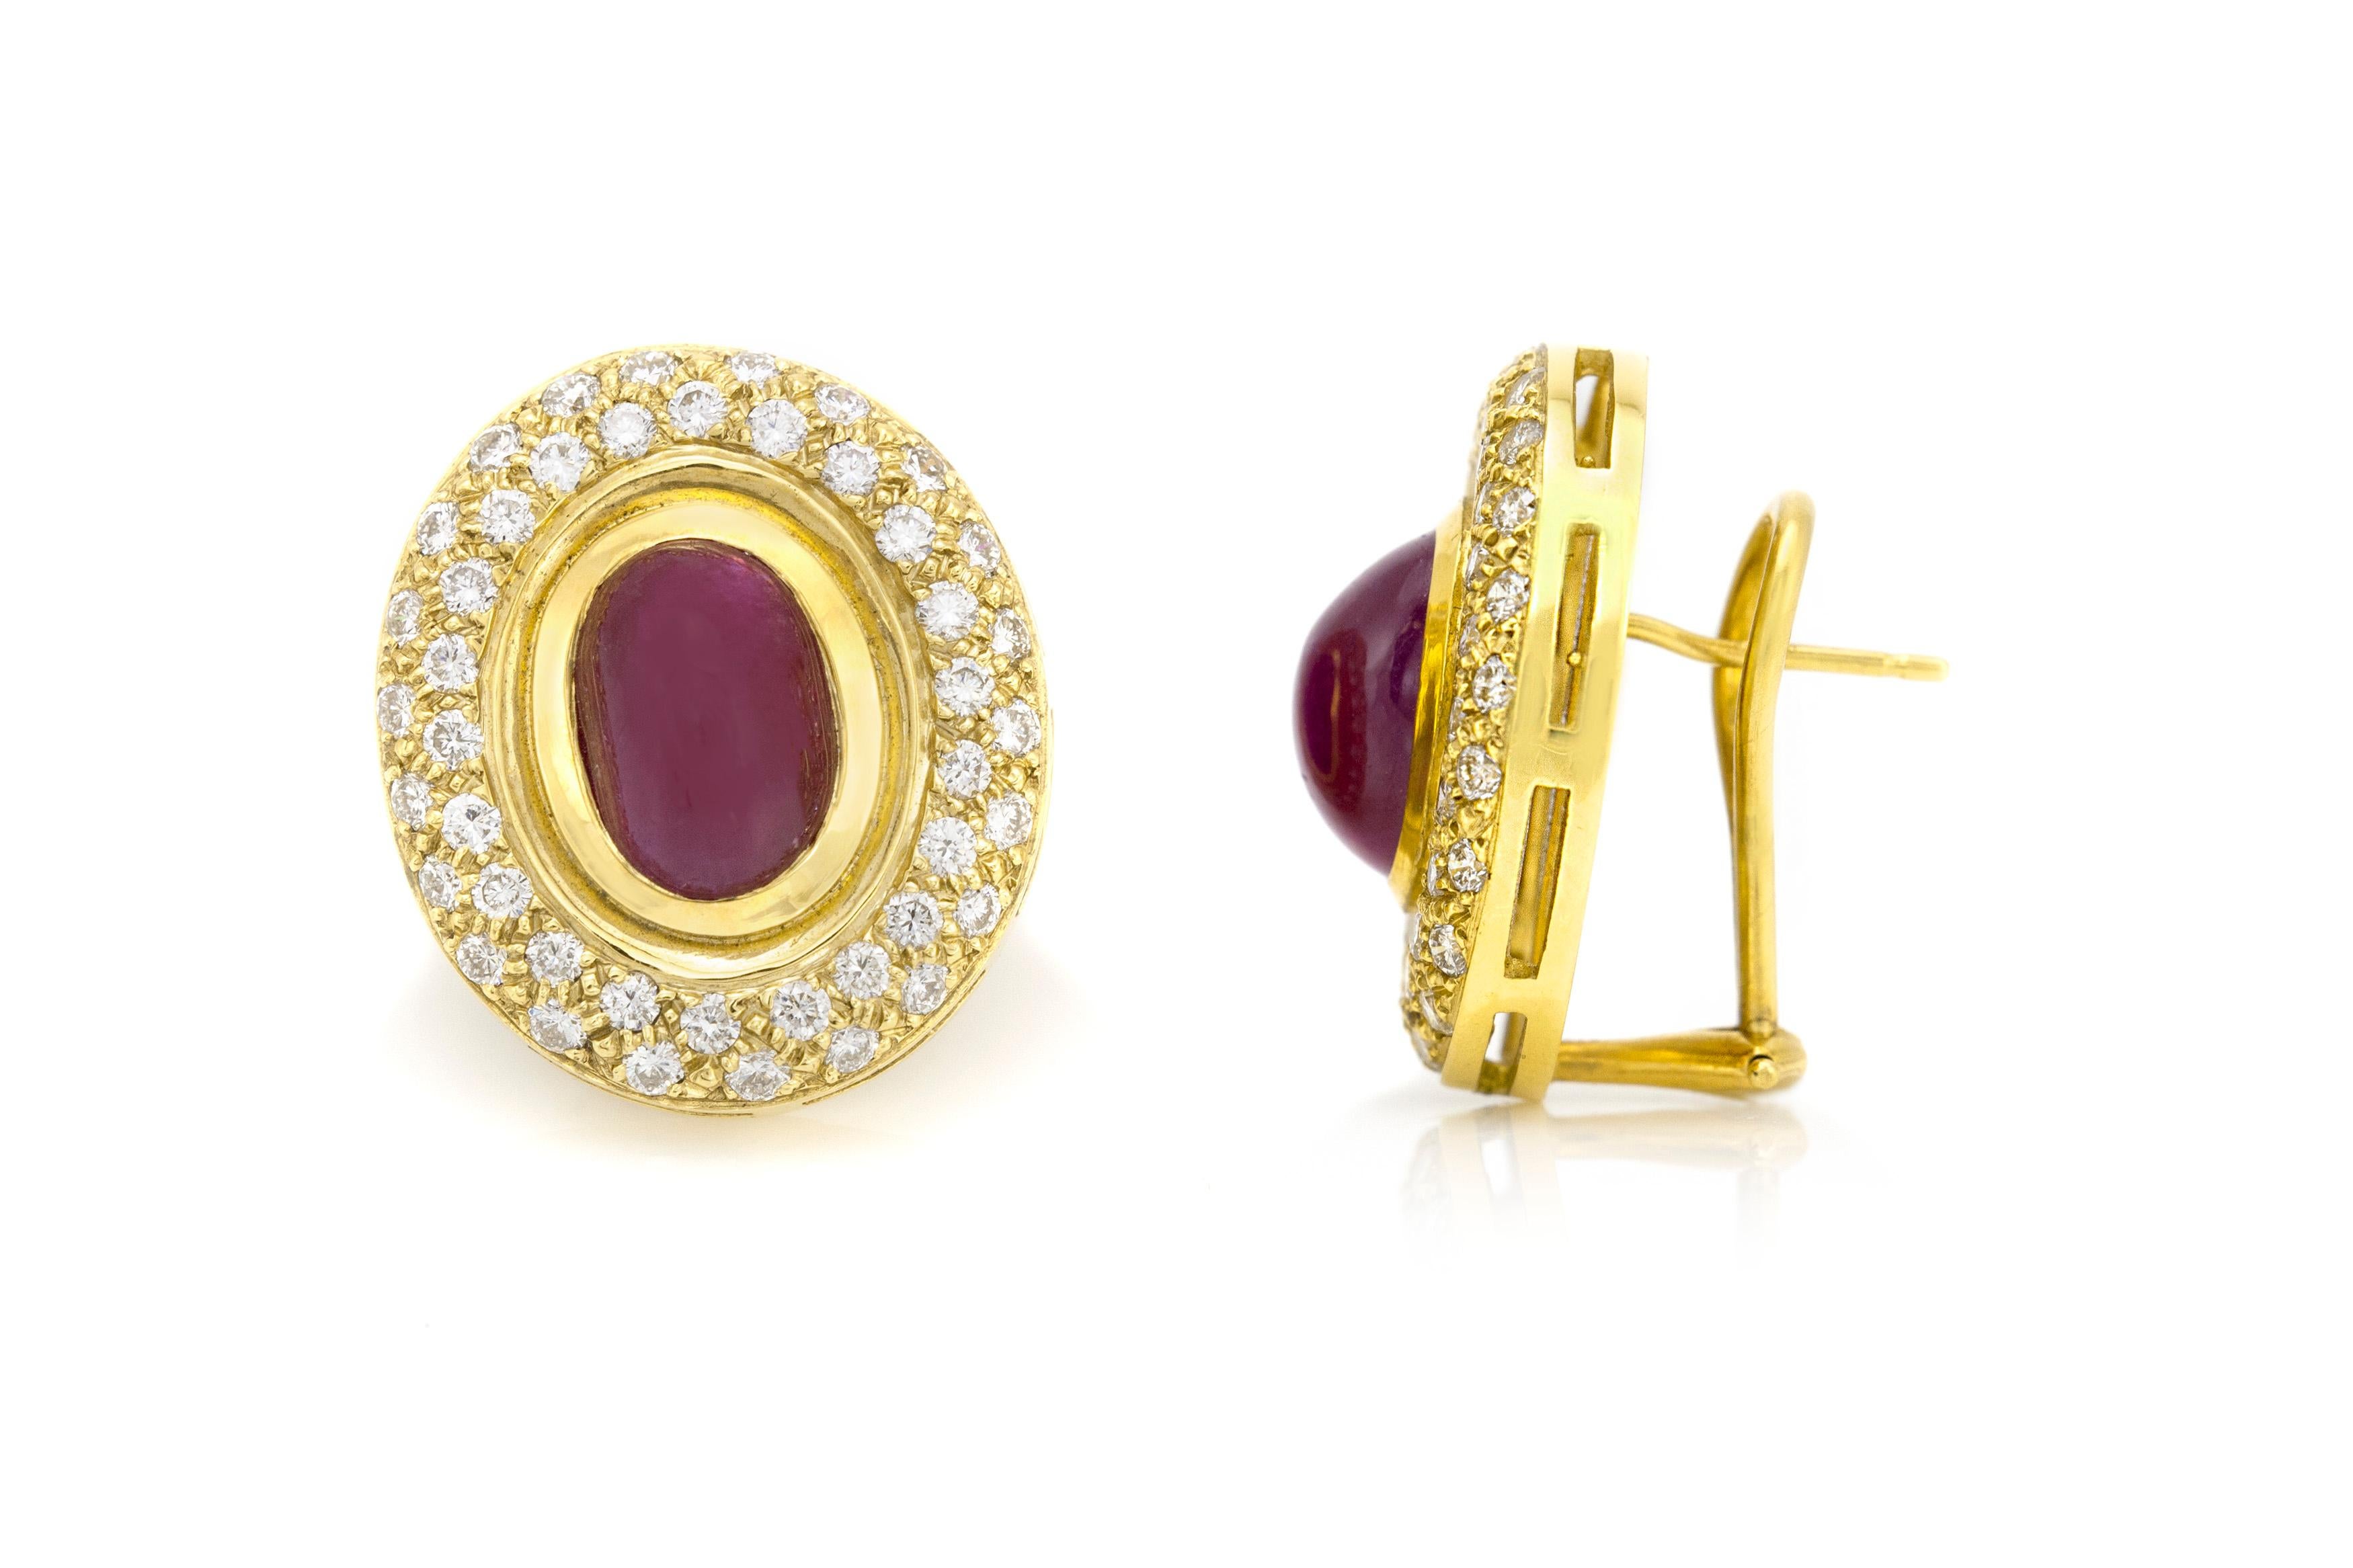 The earrings is finely crafted in 18k yellow gold with diamonds weighing approximately total of 4.00 carat and ruby weighing approximately total of 6.50 carat.